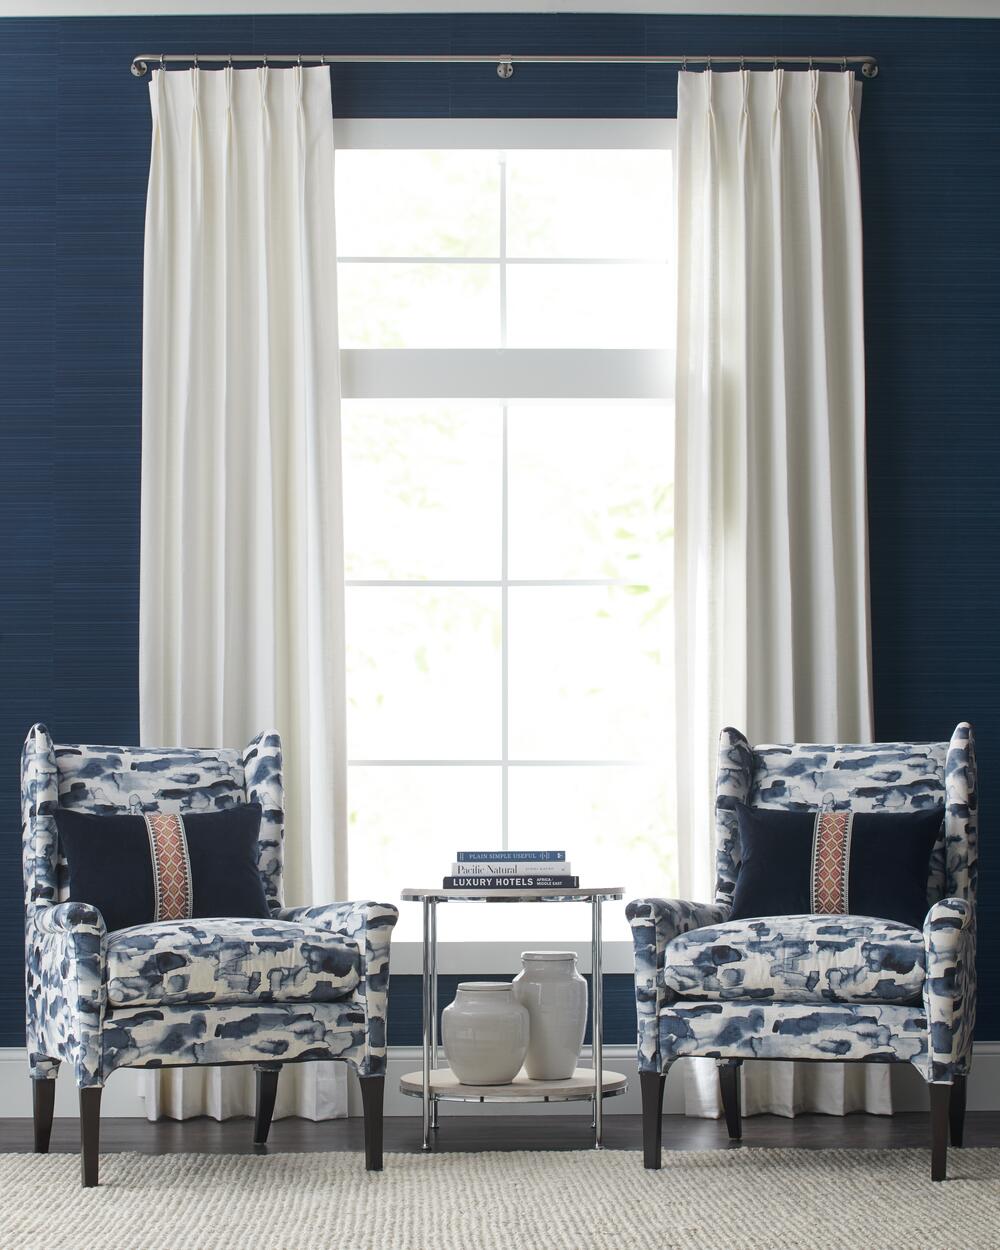 Two blue and white patterned armchairs flanking a small table with decorative items, set against a navy blue wall and a window draped with white curtains in Denver.